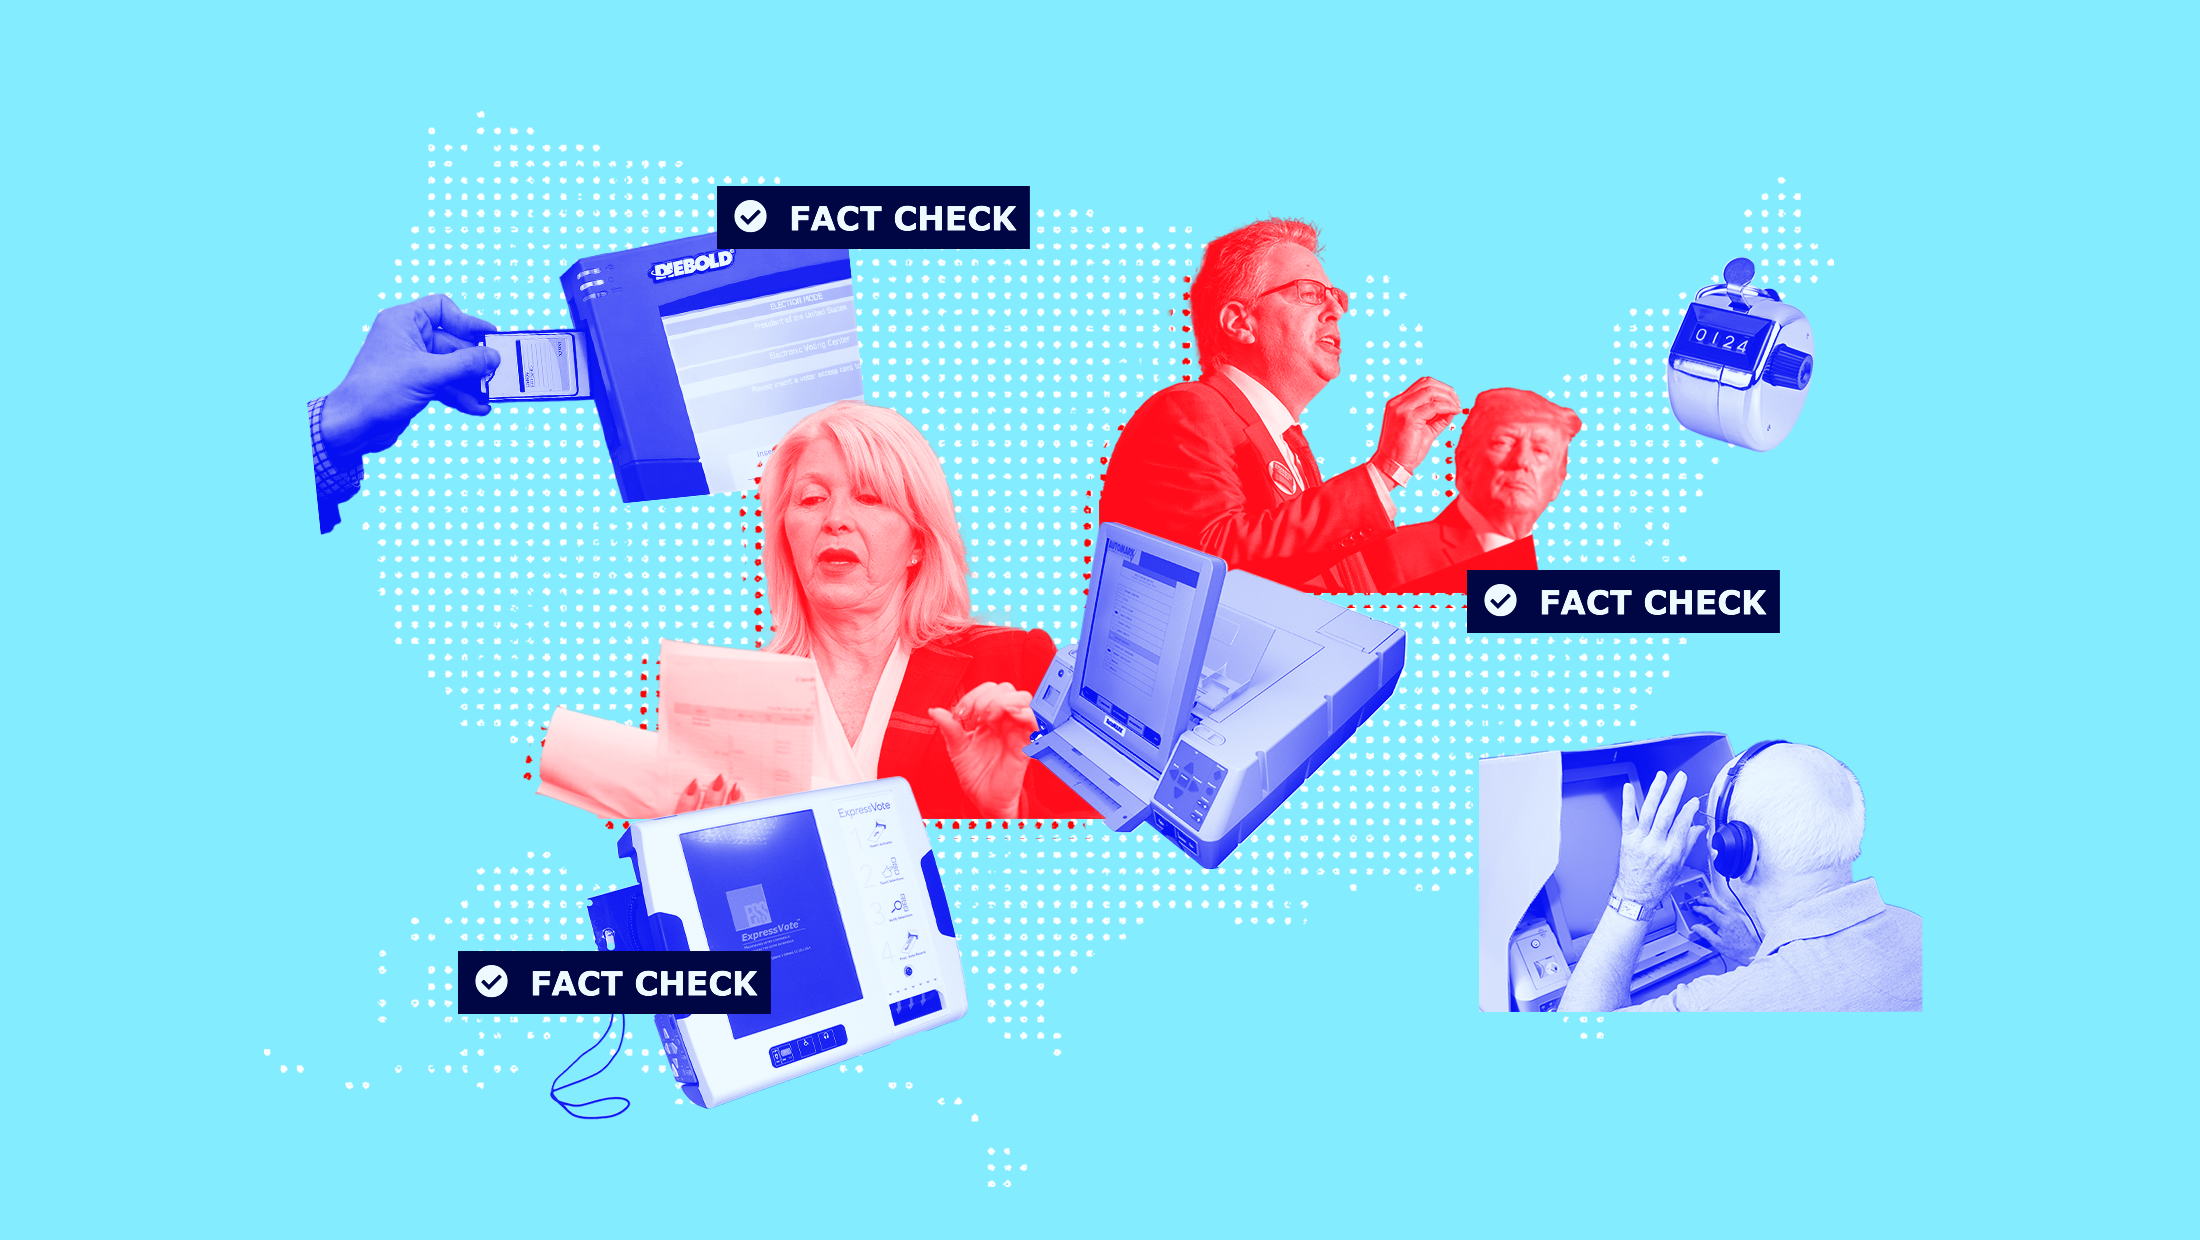 A collage of different voting equipement, images of Donald Trump, Matthew DePerno and Tina Peters and "fact check" blurbs above a dotted map of the United States